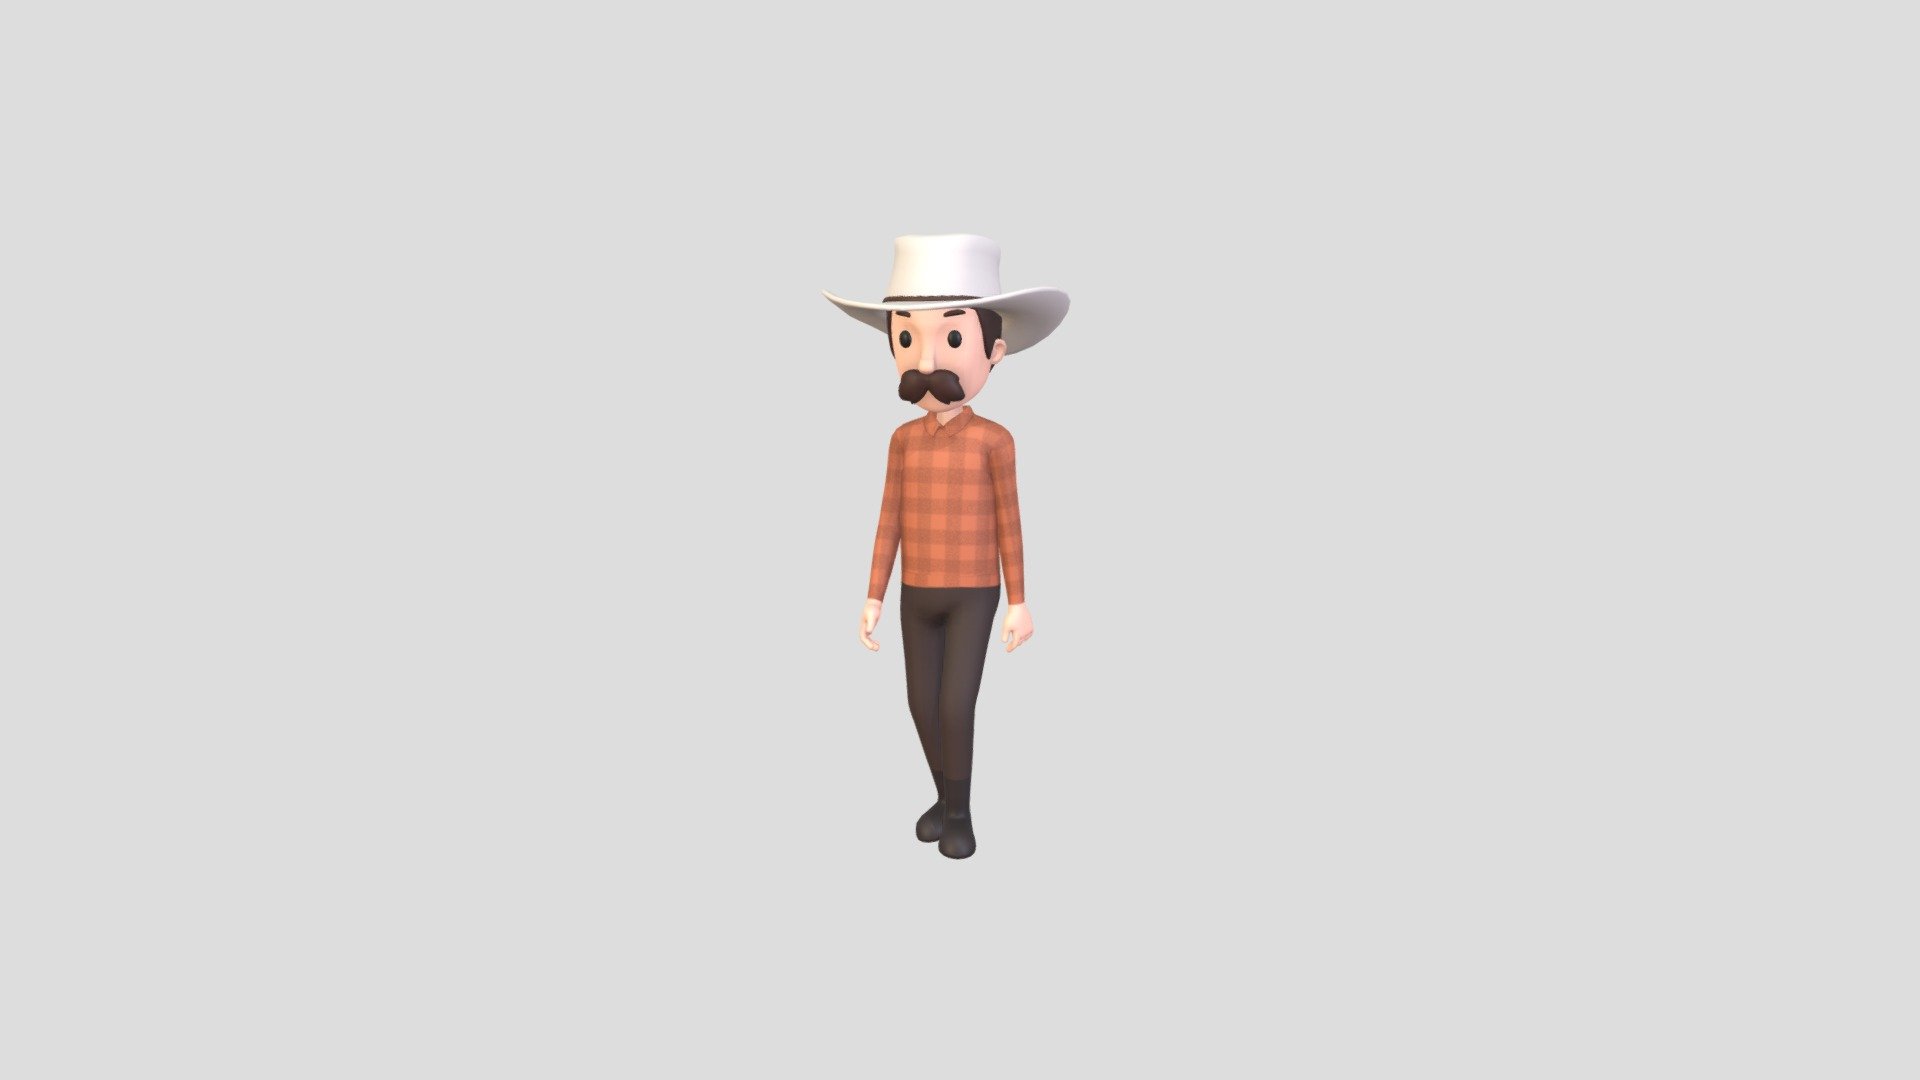 Rigged CowBoy Character 3d model.      
    


File Format      
 
- 3ds max 2021  
 
- FBX  
 
- OBJ  
    


Clean topology    

Rig with CAT in 3ds Max                          

Bone and Weight skin are in fbx file                 

No Facial Rig               

No Animation               

Non-overlapping unwrapped UVs        
 


PNG texture               

2048x2048                


- Base Color                        

- Normal                        

- Roughness                         



8,420 polygons                          

8,368 vertexs                          
 - Character176 Rigged Cowboy - Buy Royalty Free 3D model by BaluCG 3d model